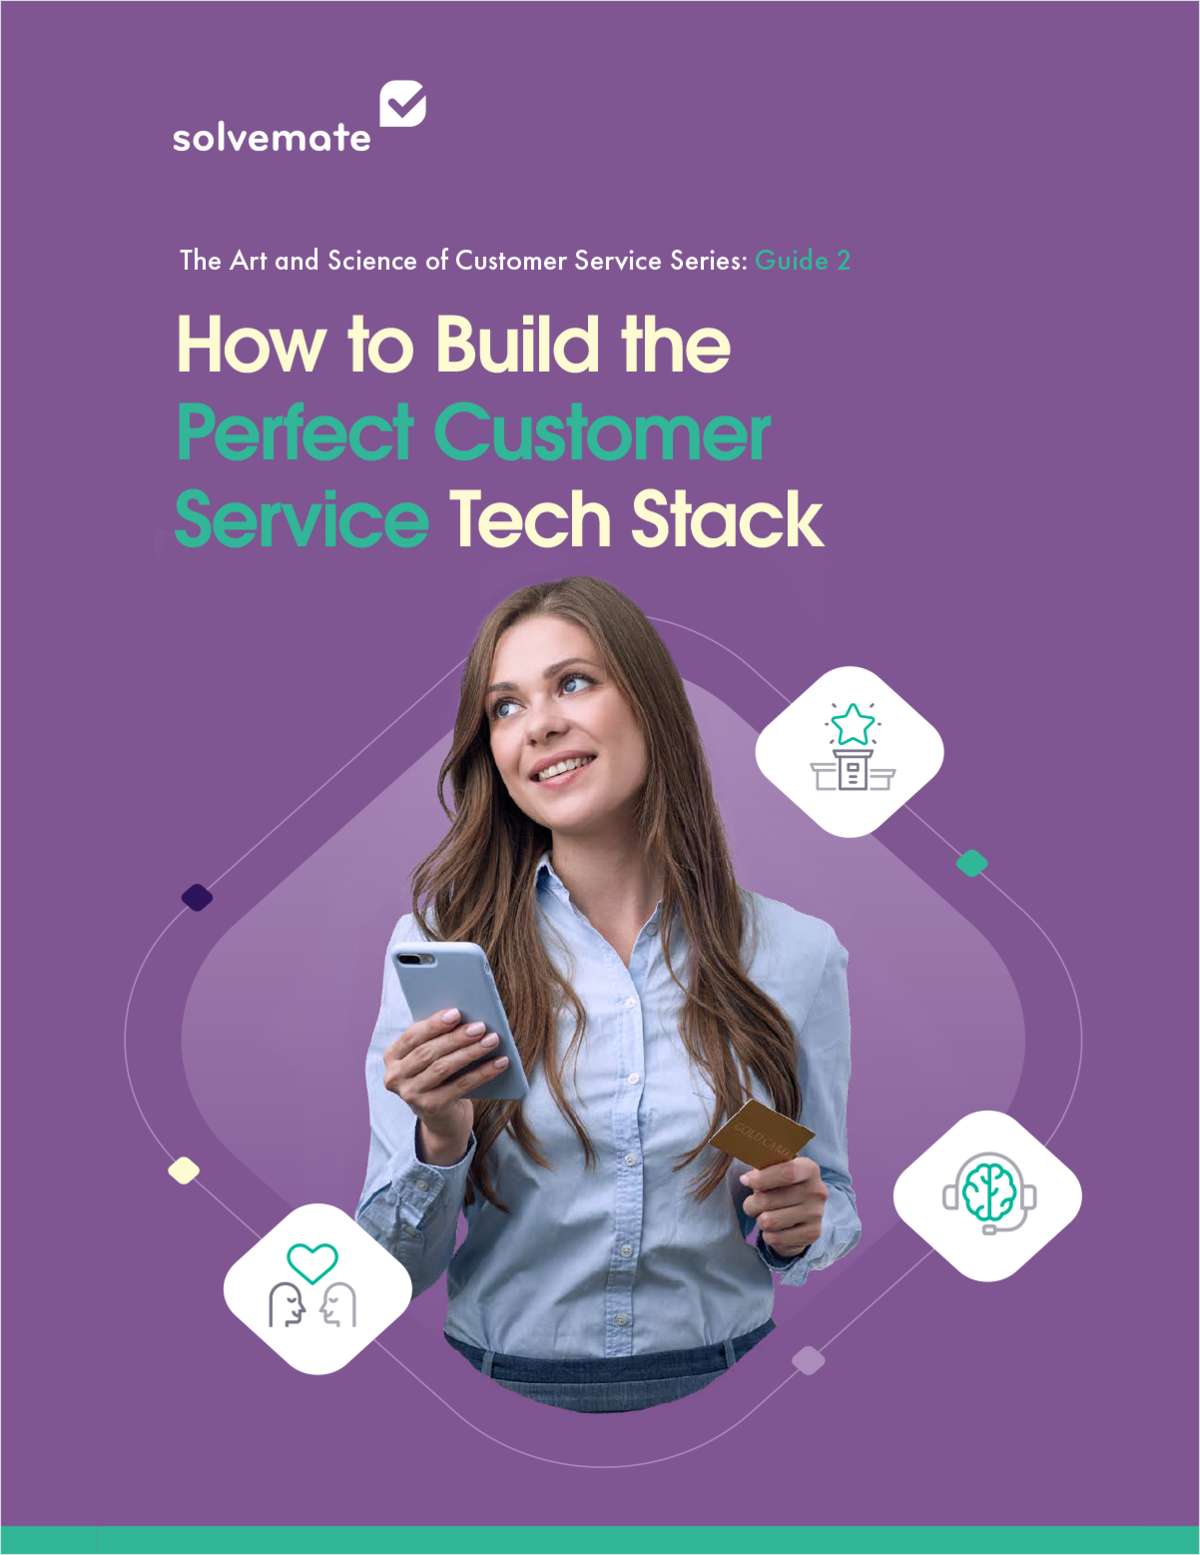 How to Build the Perfect Customer Service Tech Stack